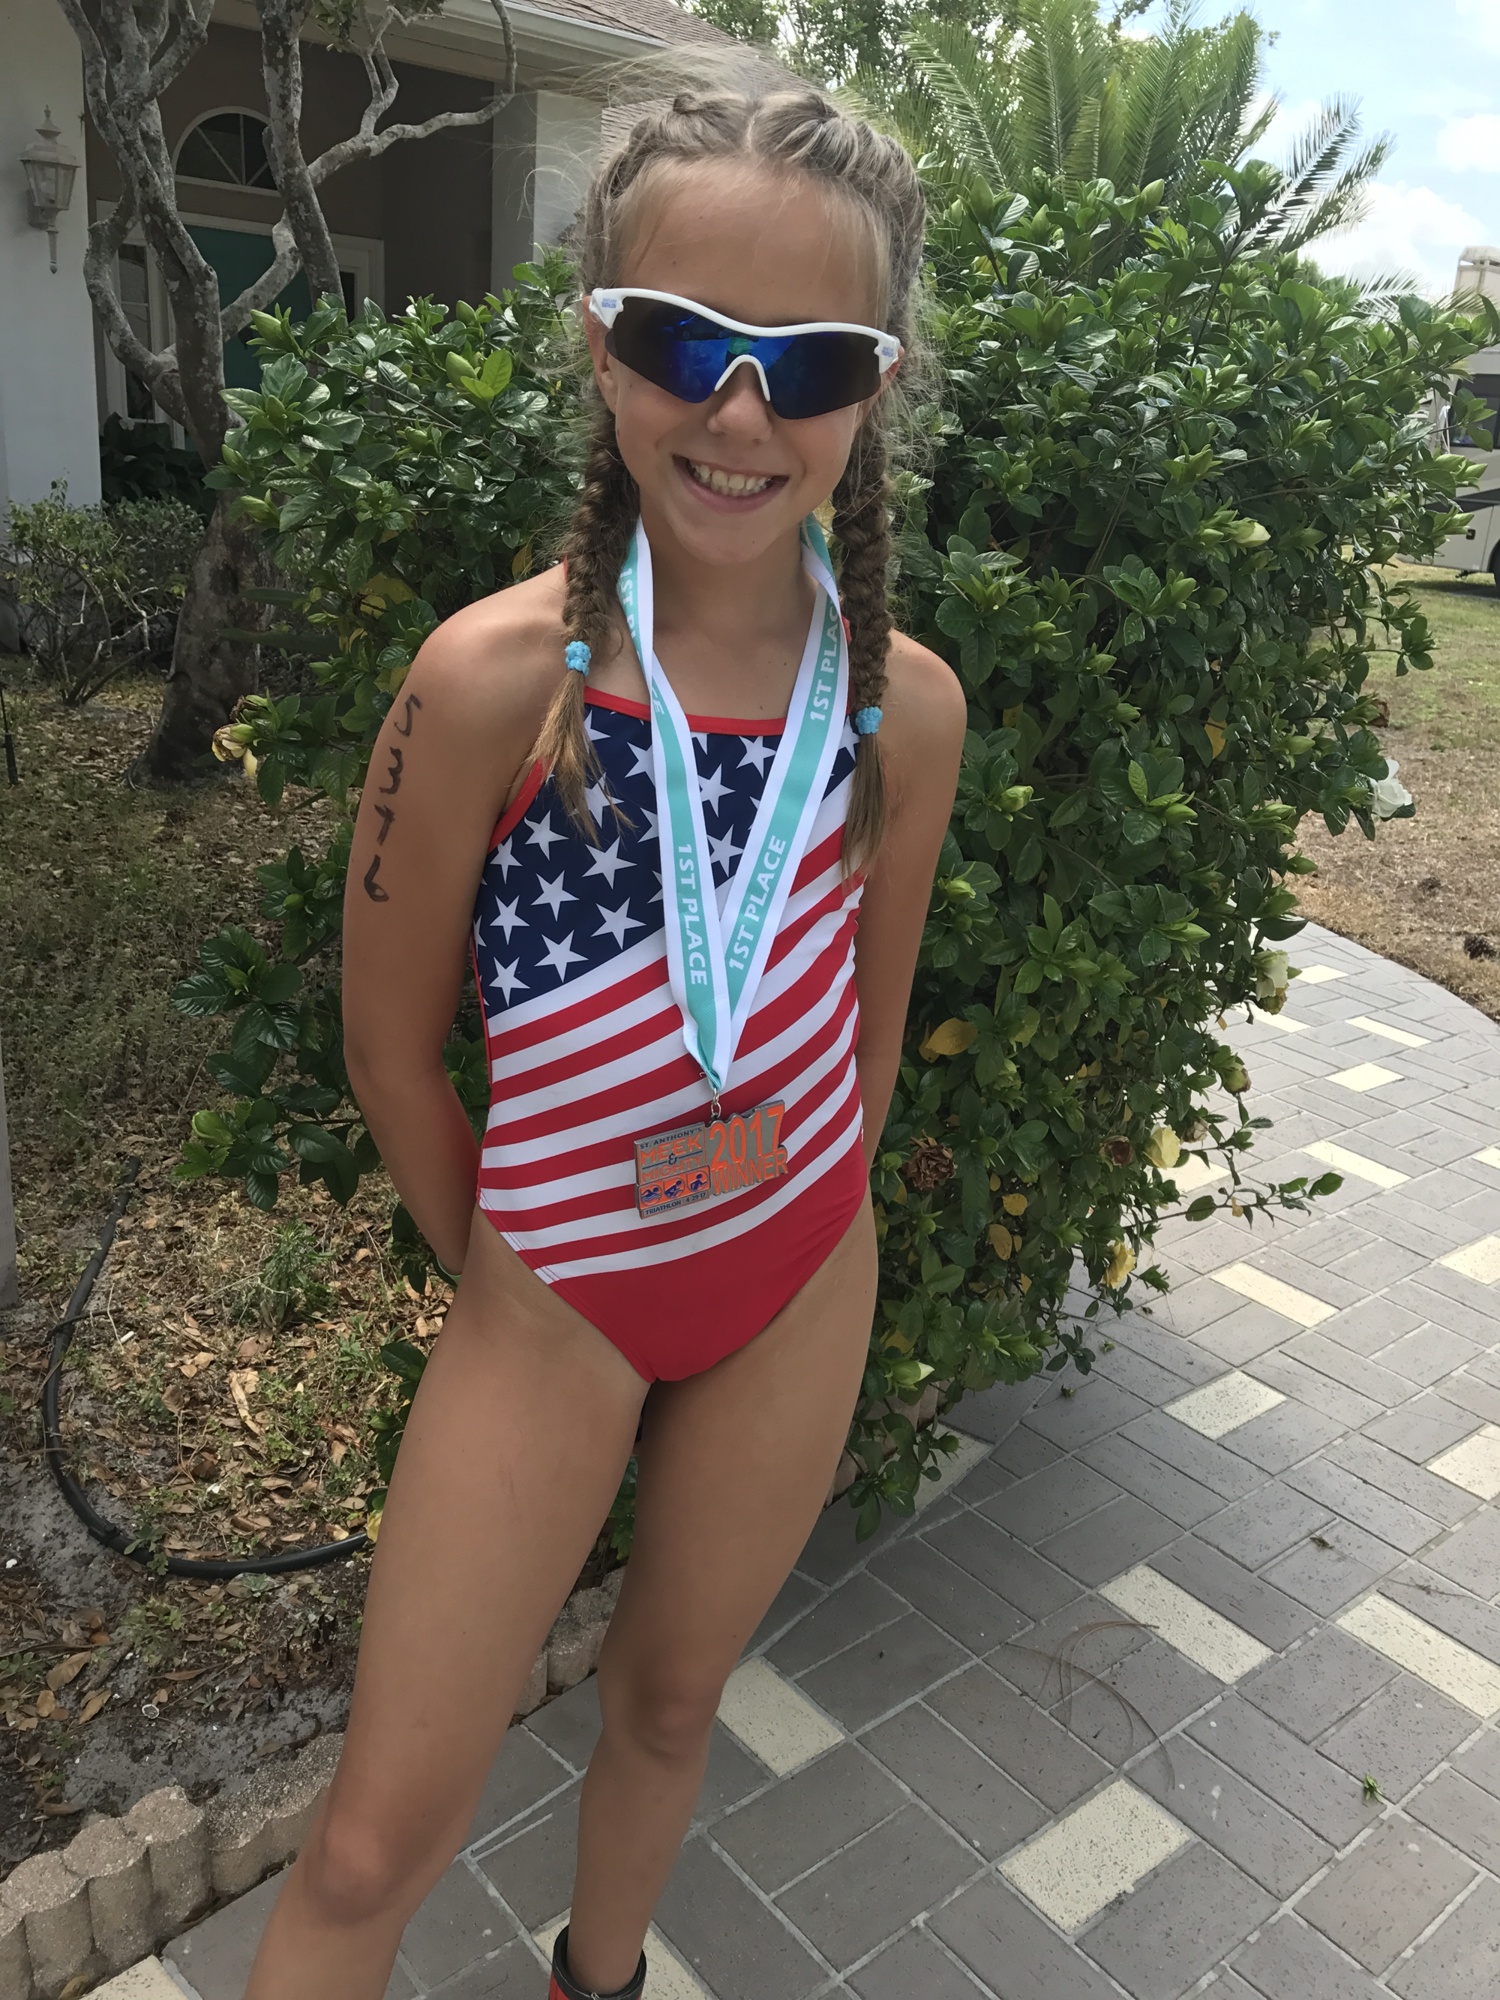 Abby Hite and her 2017 Meek and Mighty first-place medal. Courtesy photo.